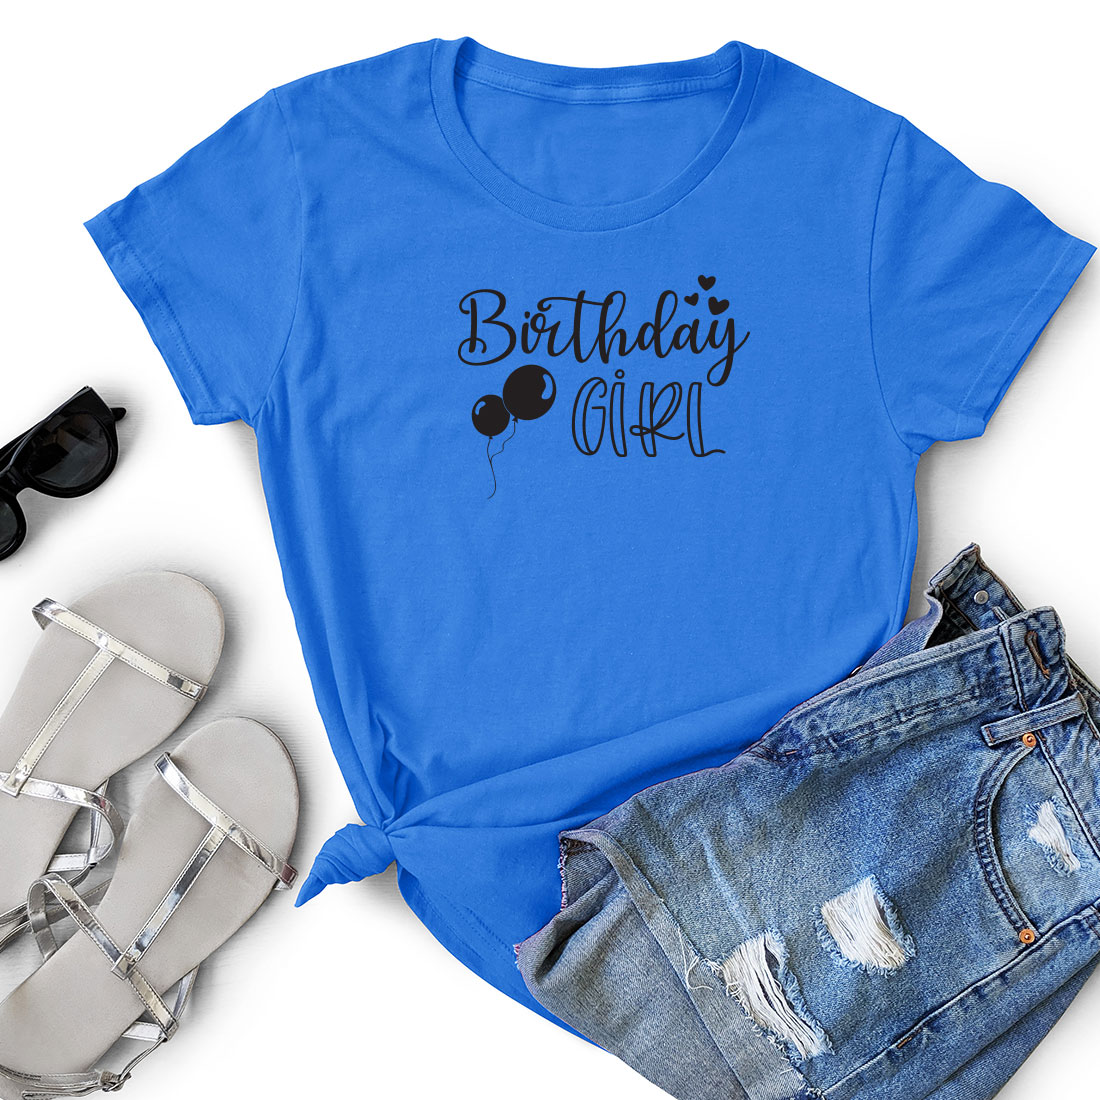 Women's birthday shirt with a pair of shorts and a pair of sandals.